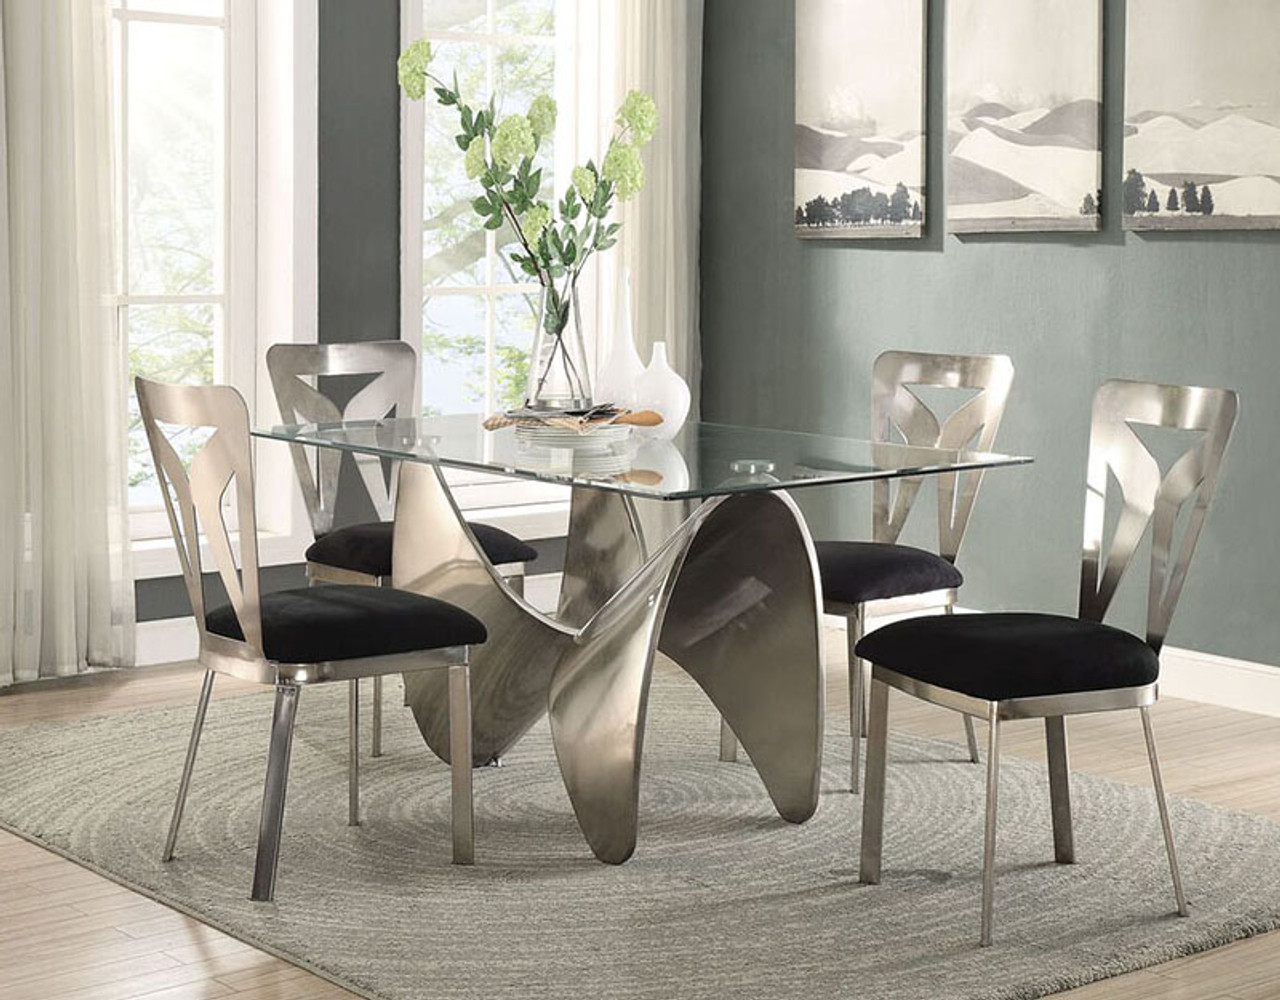 Glass Dining Room Table With Leather Chairs